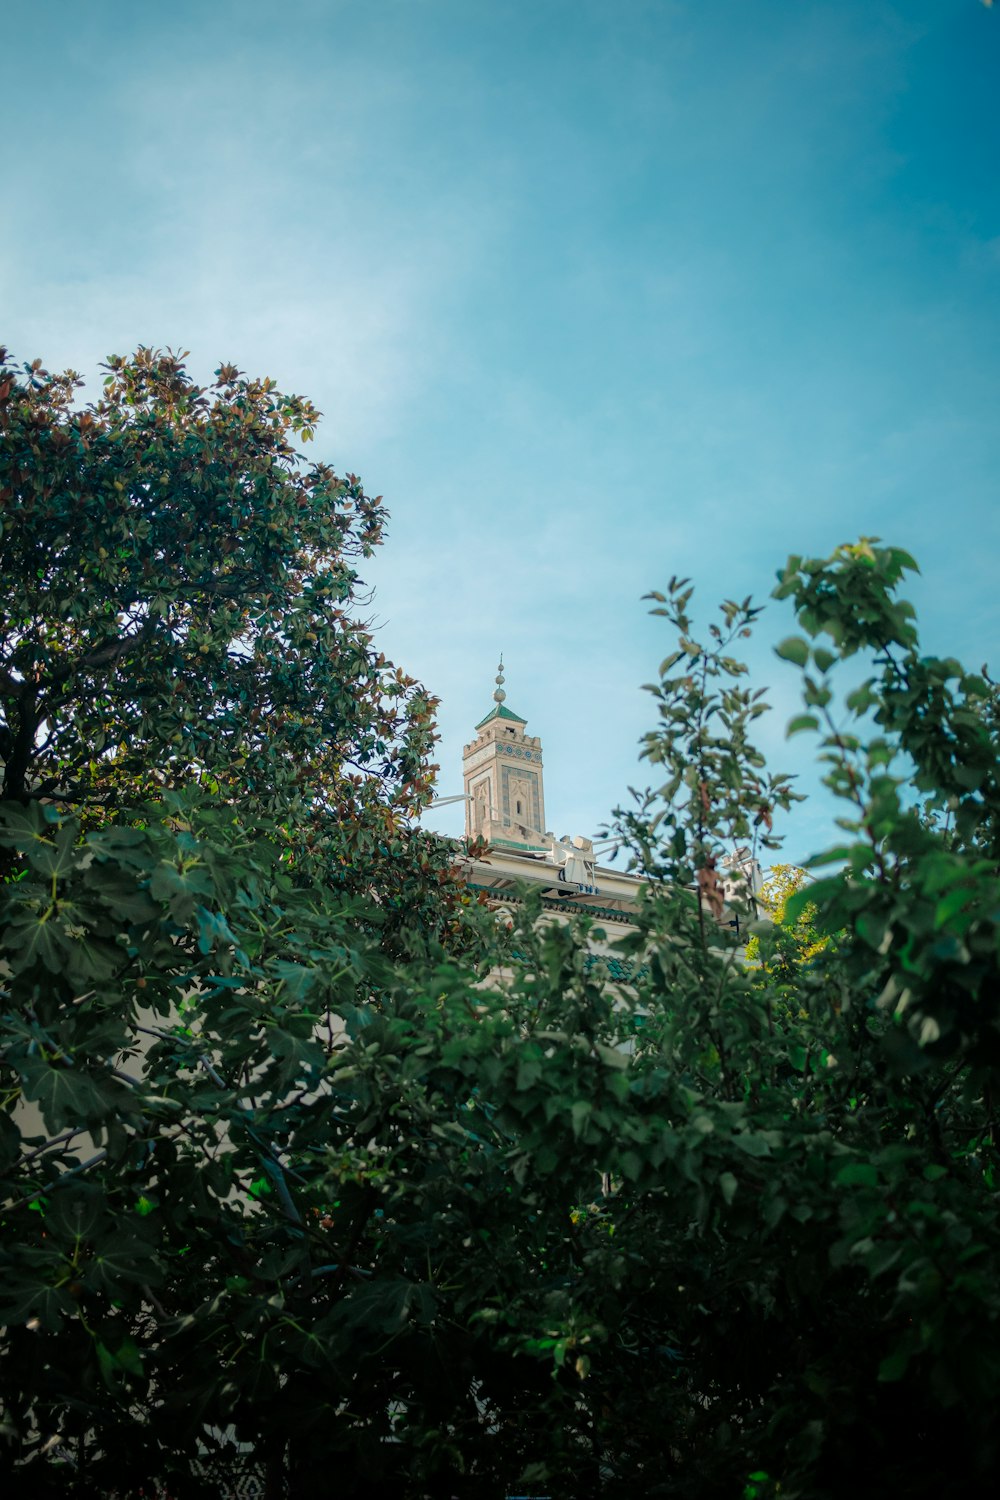 a clock tower is seen through the trees